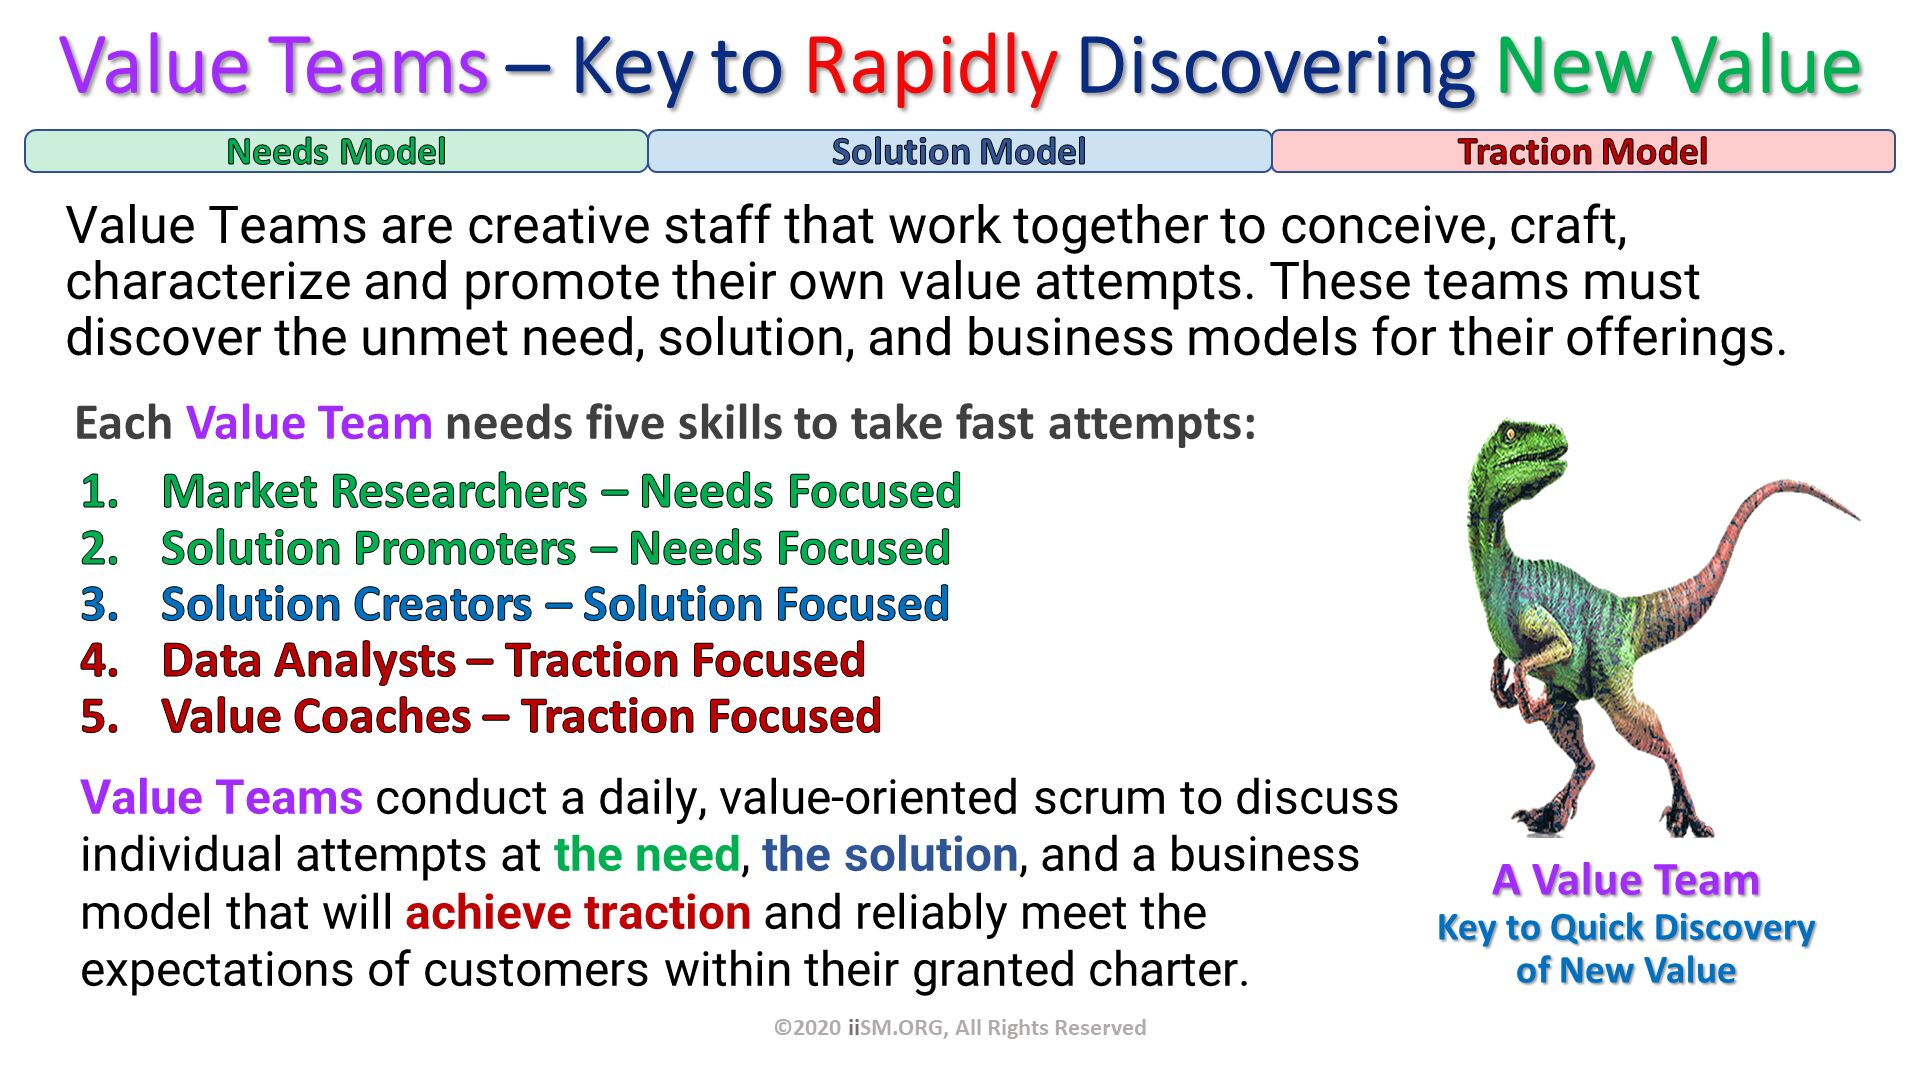 Value Teams – Key to Rapidly Discovering New Value. Each Value Team needs five skills to take fast attempts:
. ©2020 iiSM.ORG, All Rights Reserved. Value Teams are creative staff that work together to conceive, craft, characterize and promote their own value attempts. These teams must discover the unmet need, solution, and business models for their offerings. Value Teams conduct a daily, value-oriented scrum to discussindividual attempts at the need, the solution, and a business model that will achieve traction and reliably meet the expectations of customers within their granted charter. Market Researchers – Needs Focused
Solution Promoters – Needs Focused
Solution Creators – Solution Focused
Data Analysts – Traction Focused
Value Coaches – Traction Focused. 